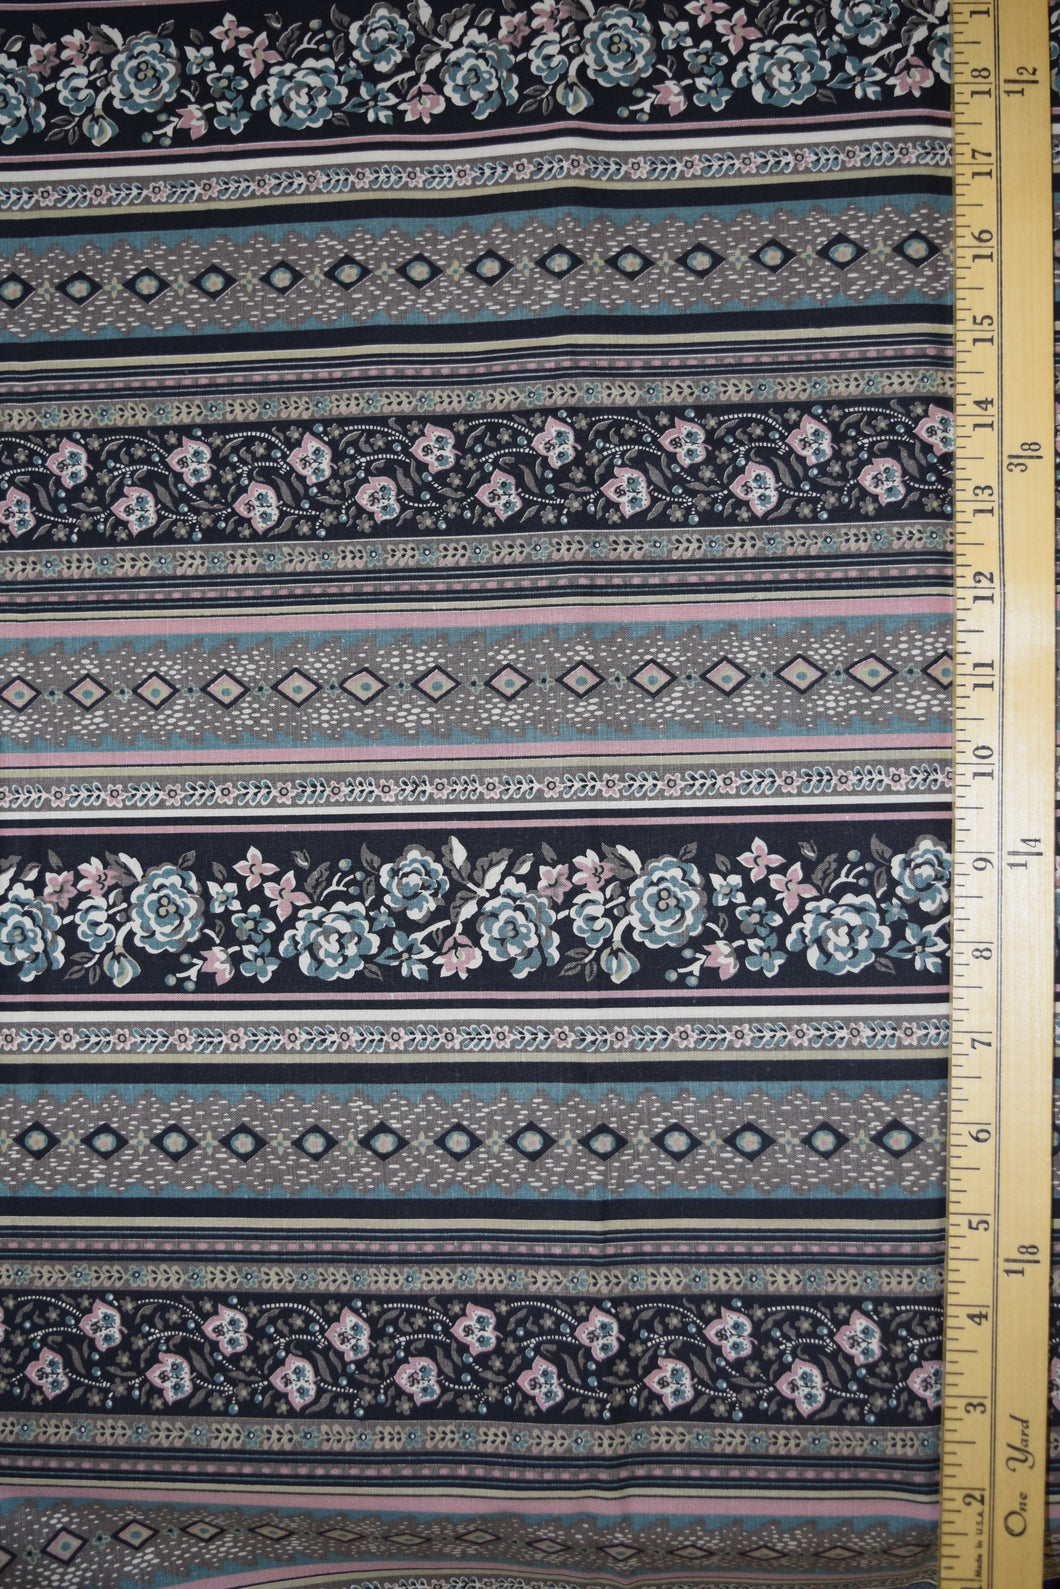 Stylized flowers and geometric designs in narrow border print. Muted colors of mauve, blue, taupe and black.